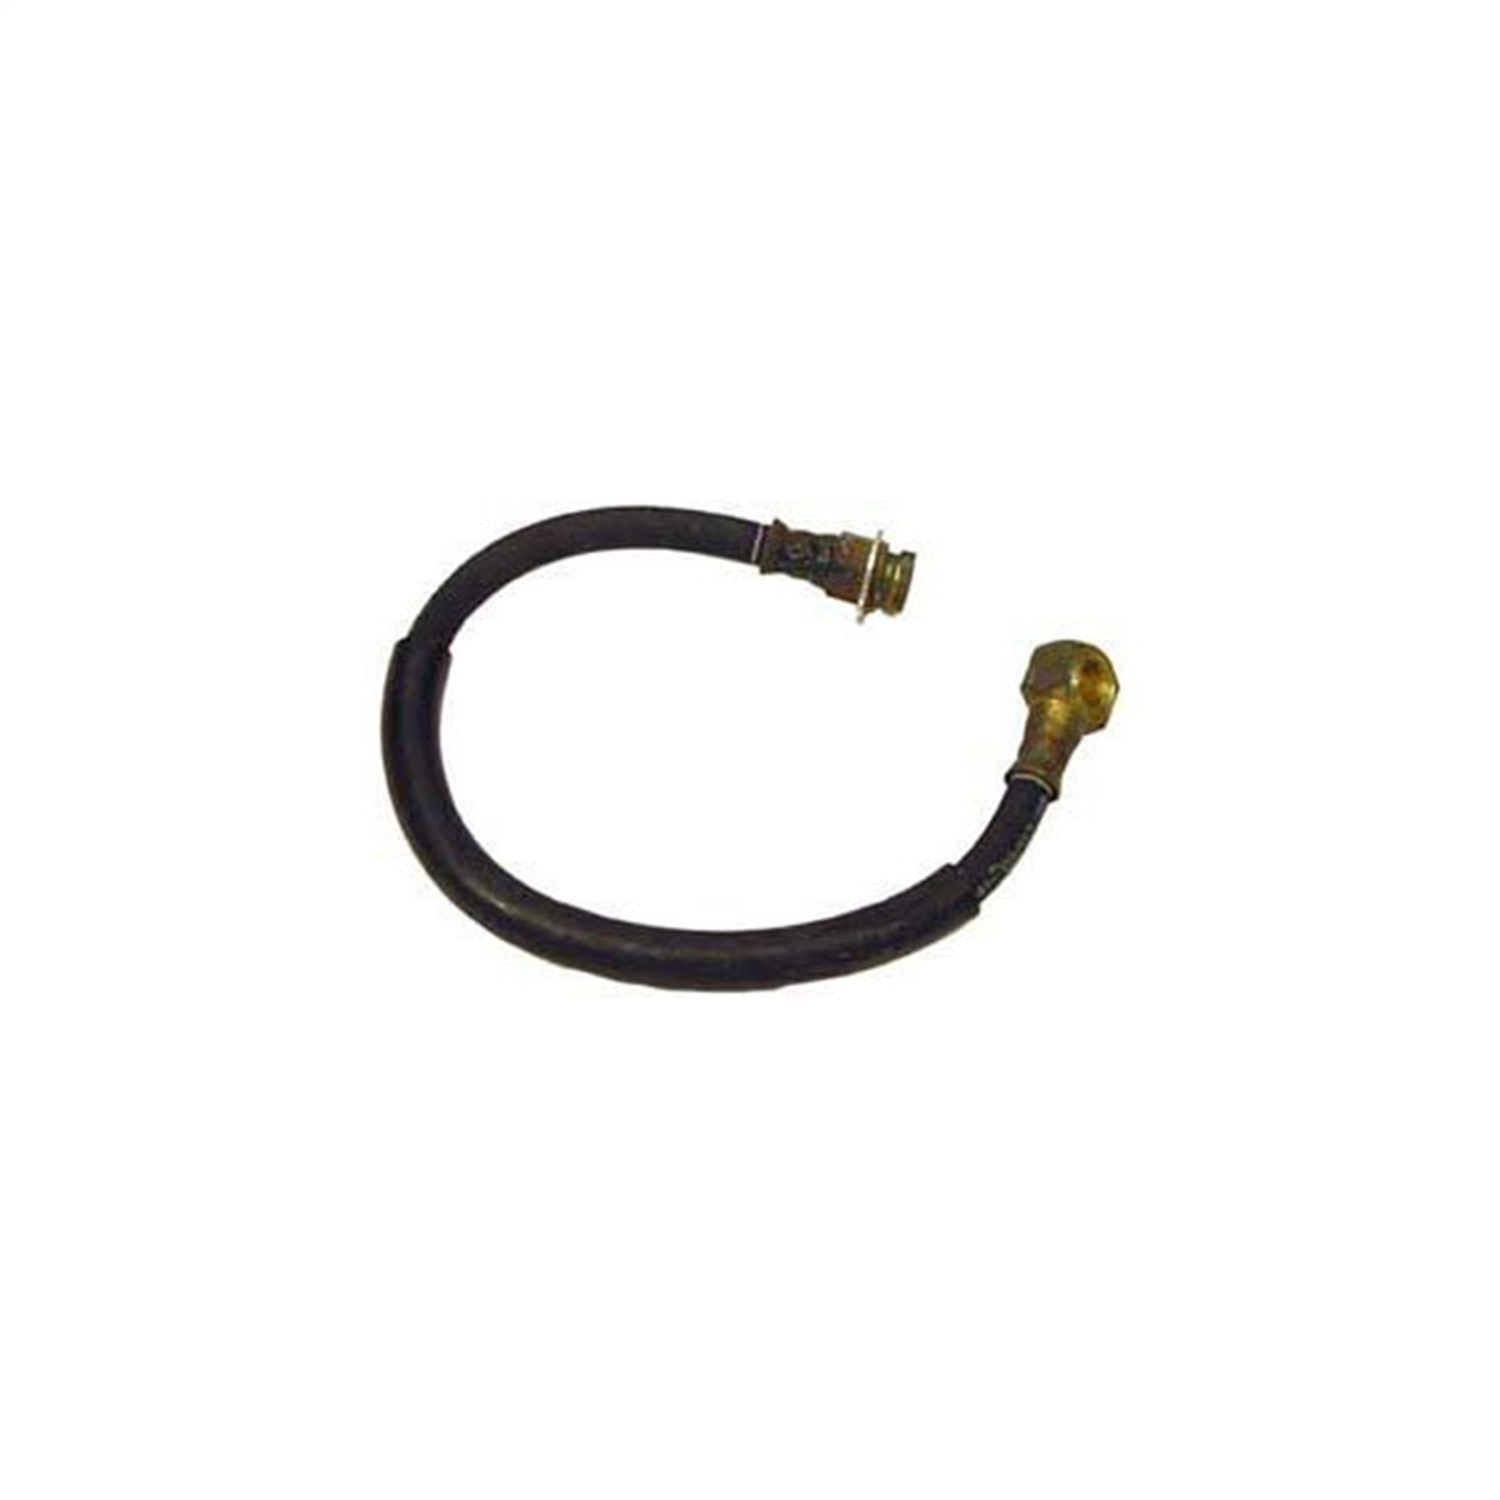 Omix Brake Hose (Front), For Disc Brakes With 2-Bolt Calipers, 78-81 Jeep Cj5, Cj7 And Cj8